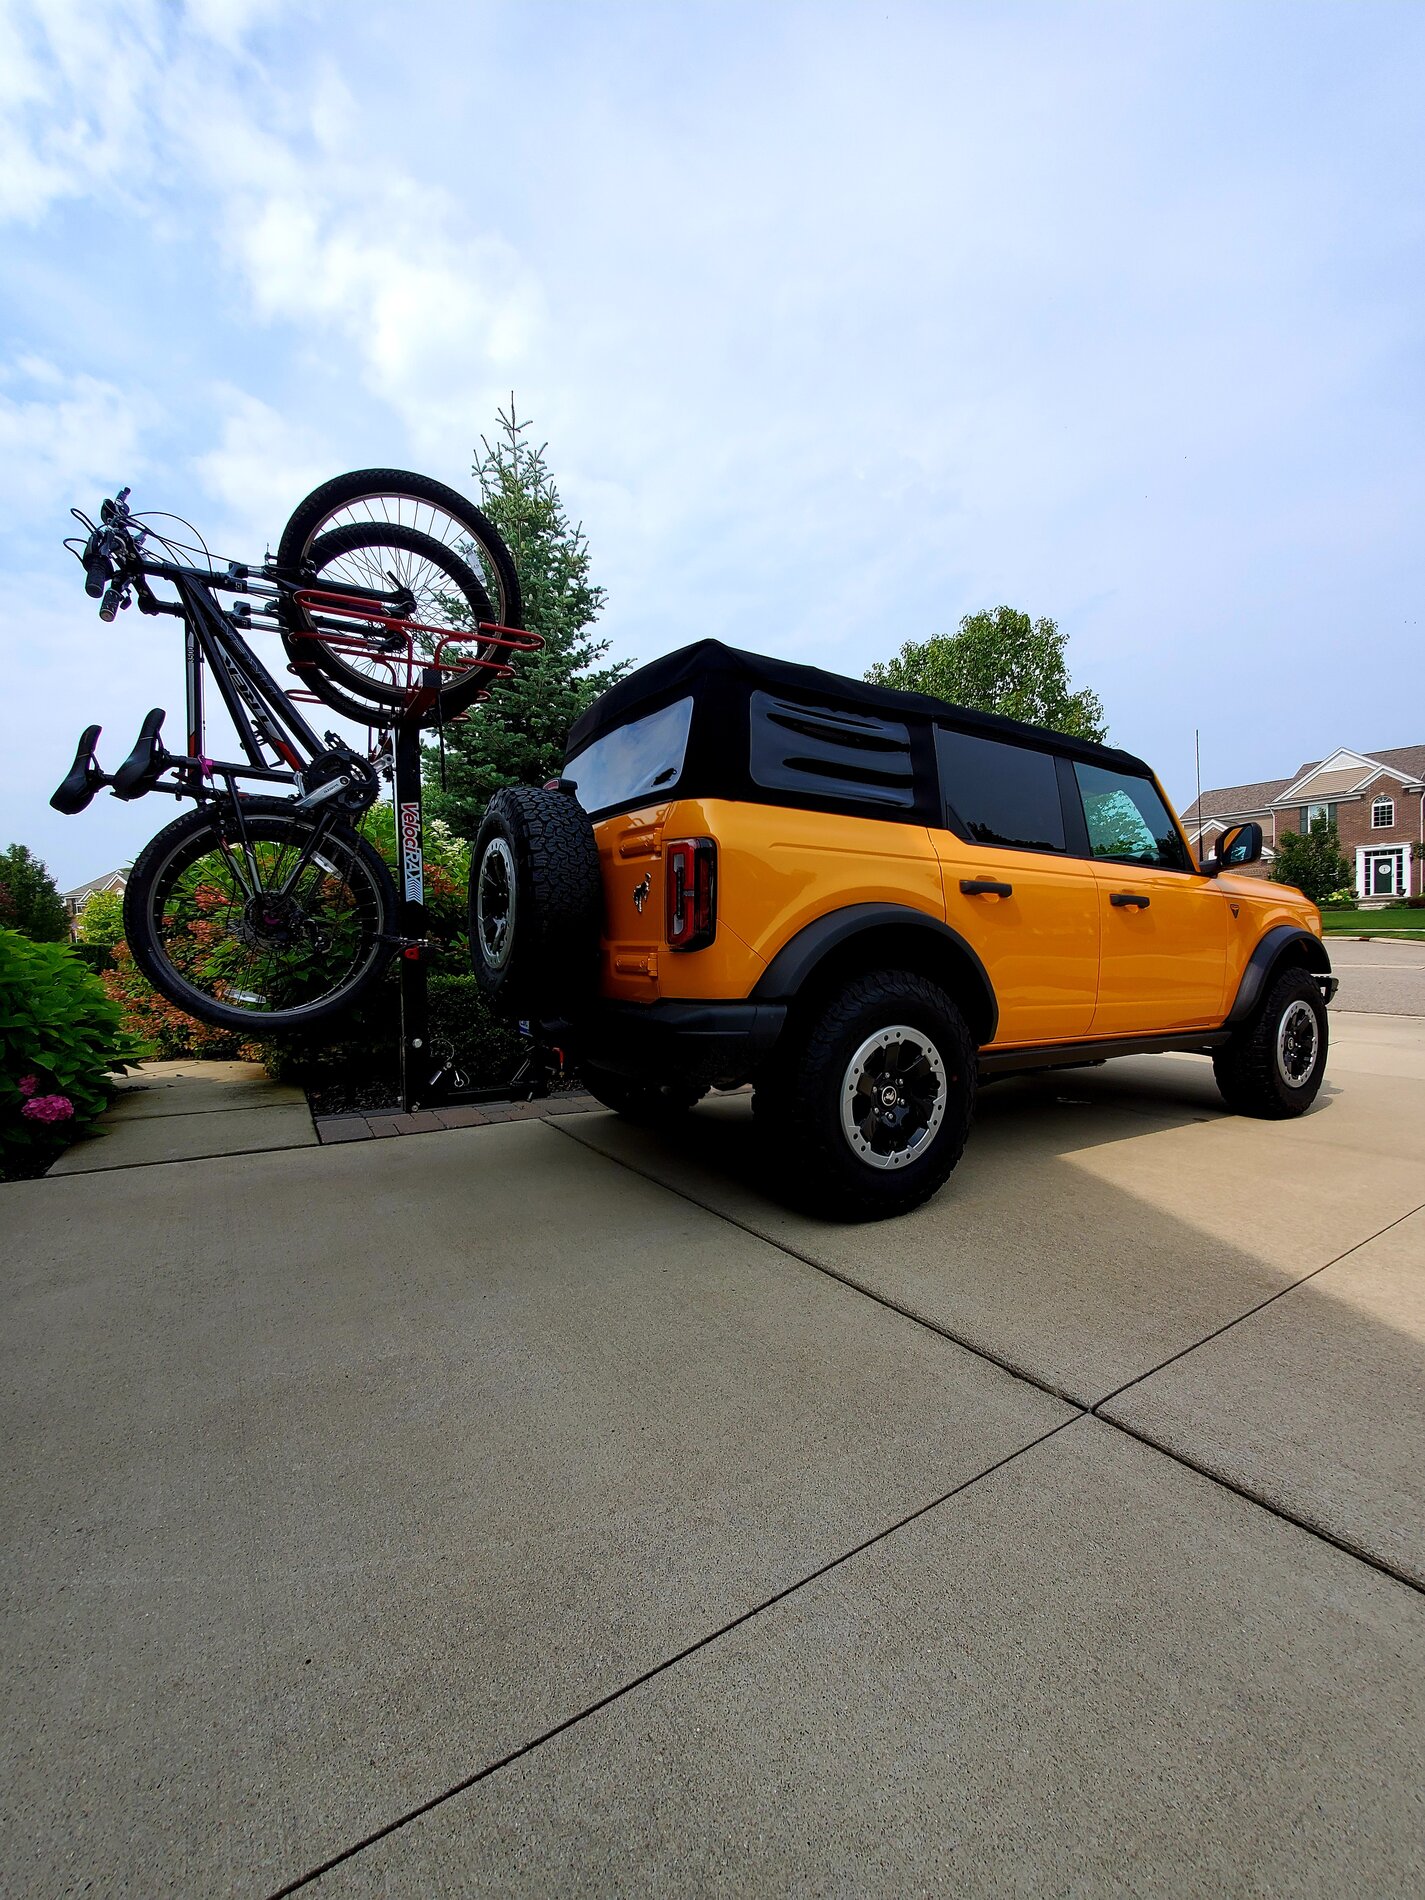 Ford Bronco Bike rack / bicycle carrier options for 2021 Bronco? 20210808_113732